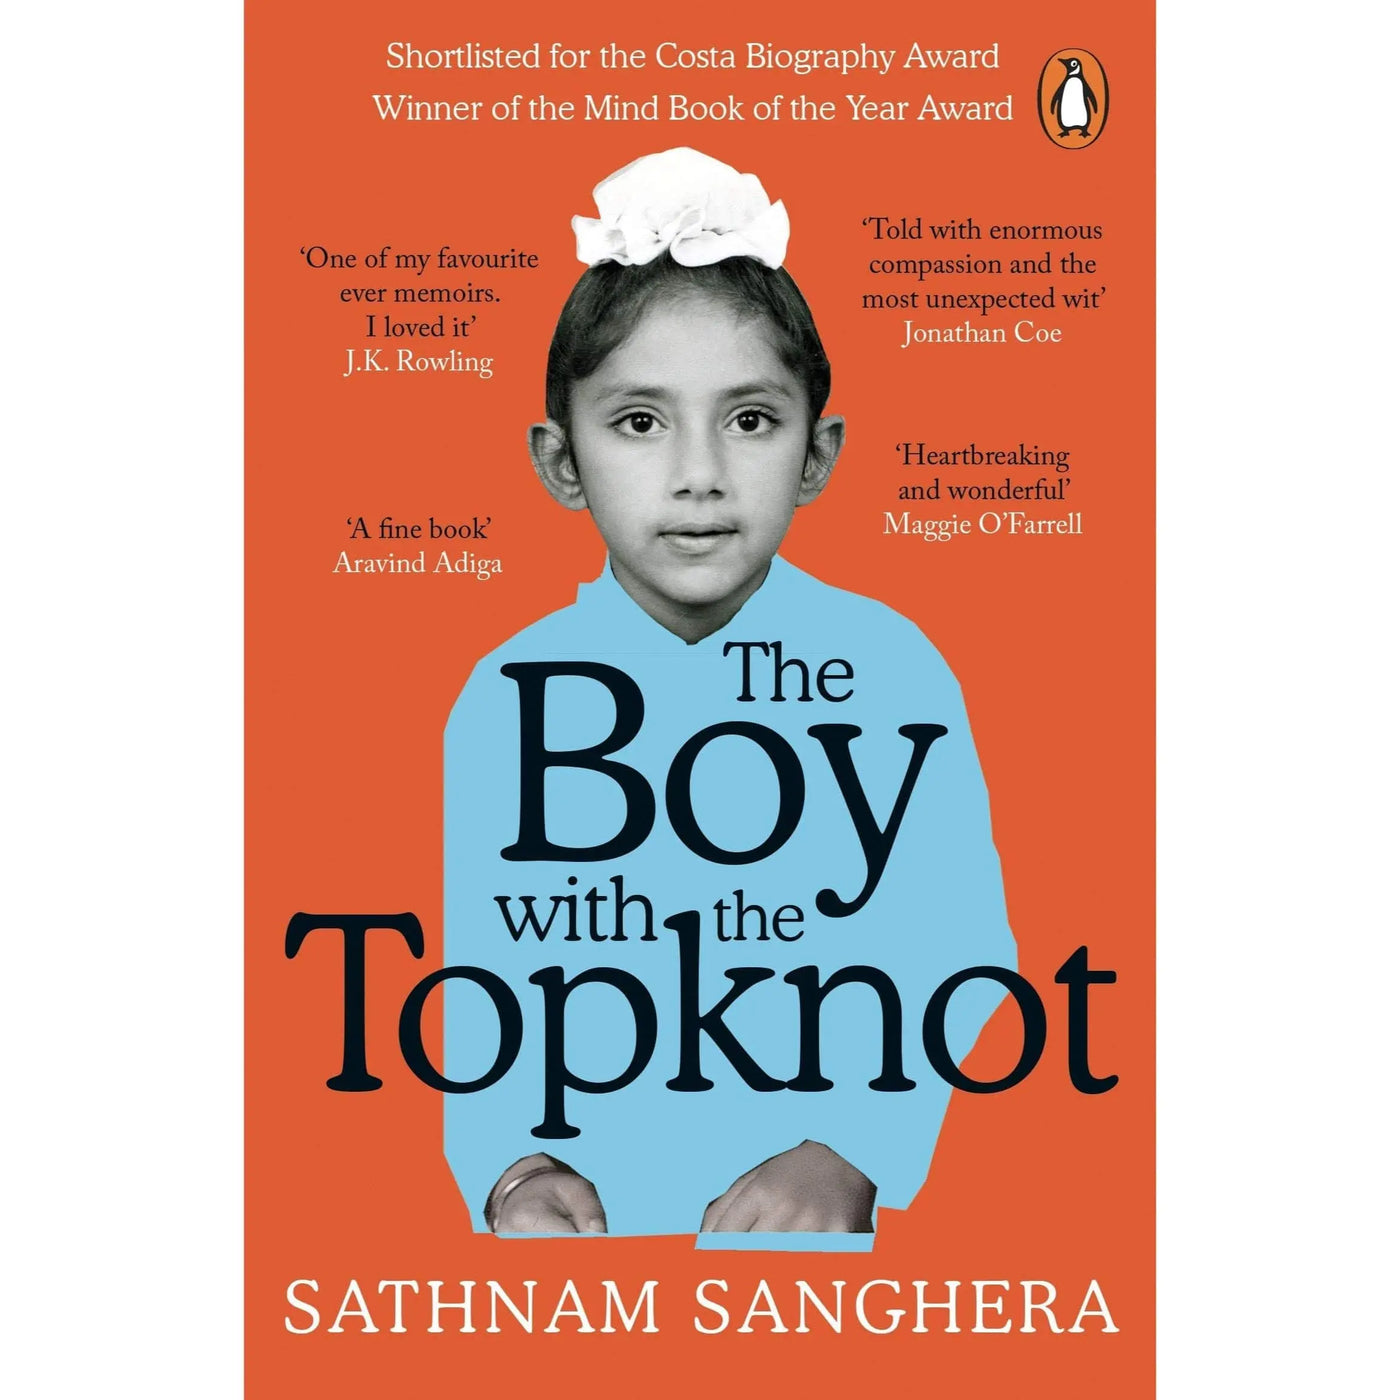 Sathnam Sanghera: The Boy with the Topknot - Migration Museum Shop